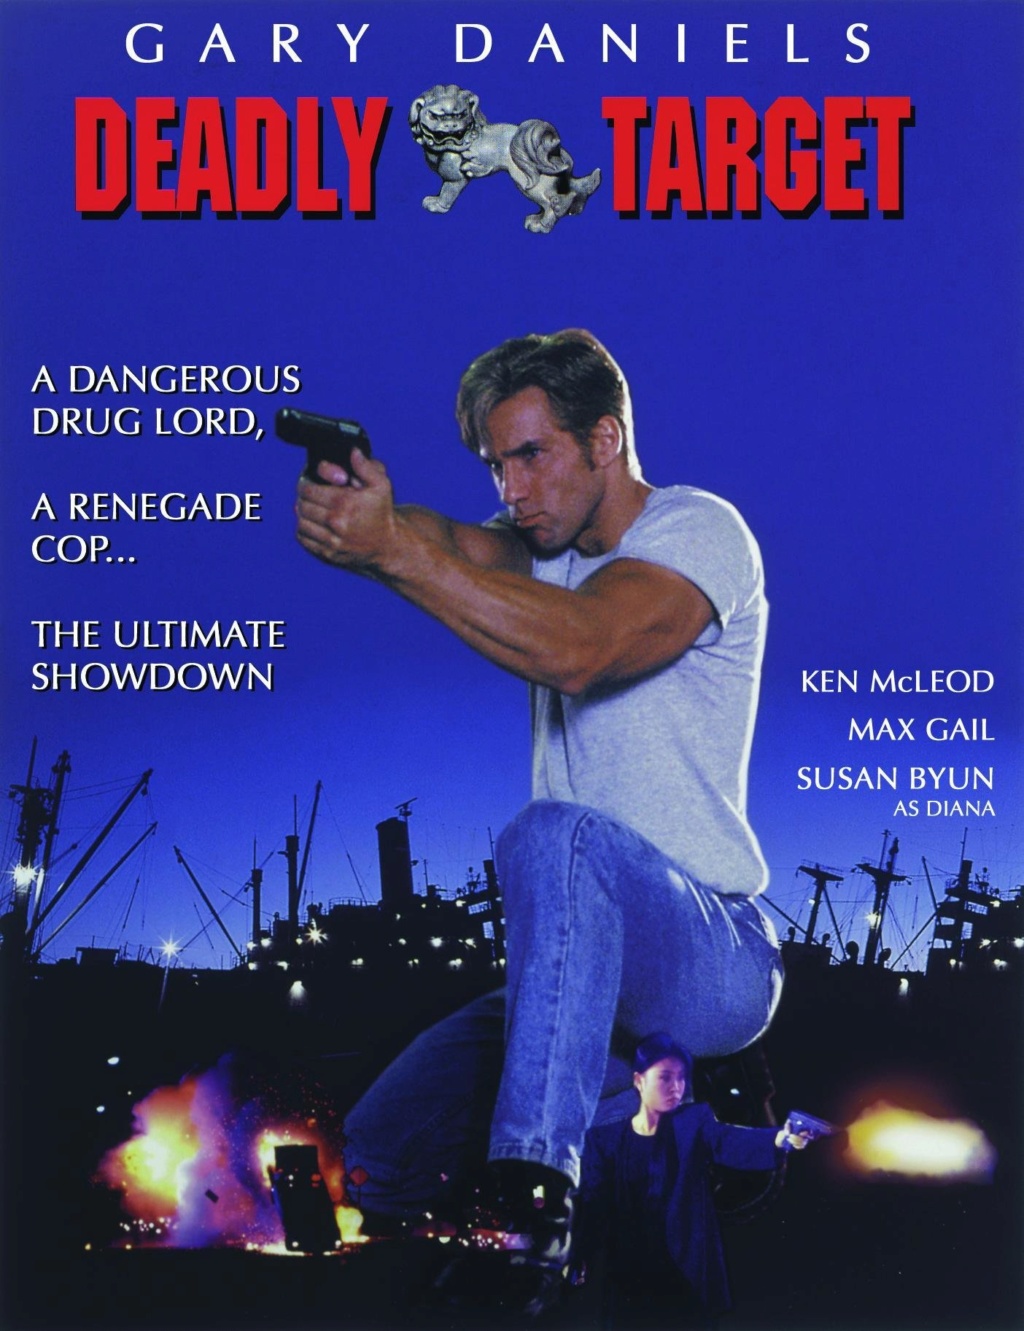 deadly target - Deadly Target 81oyu410